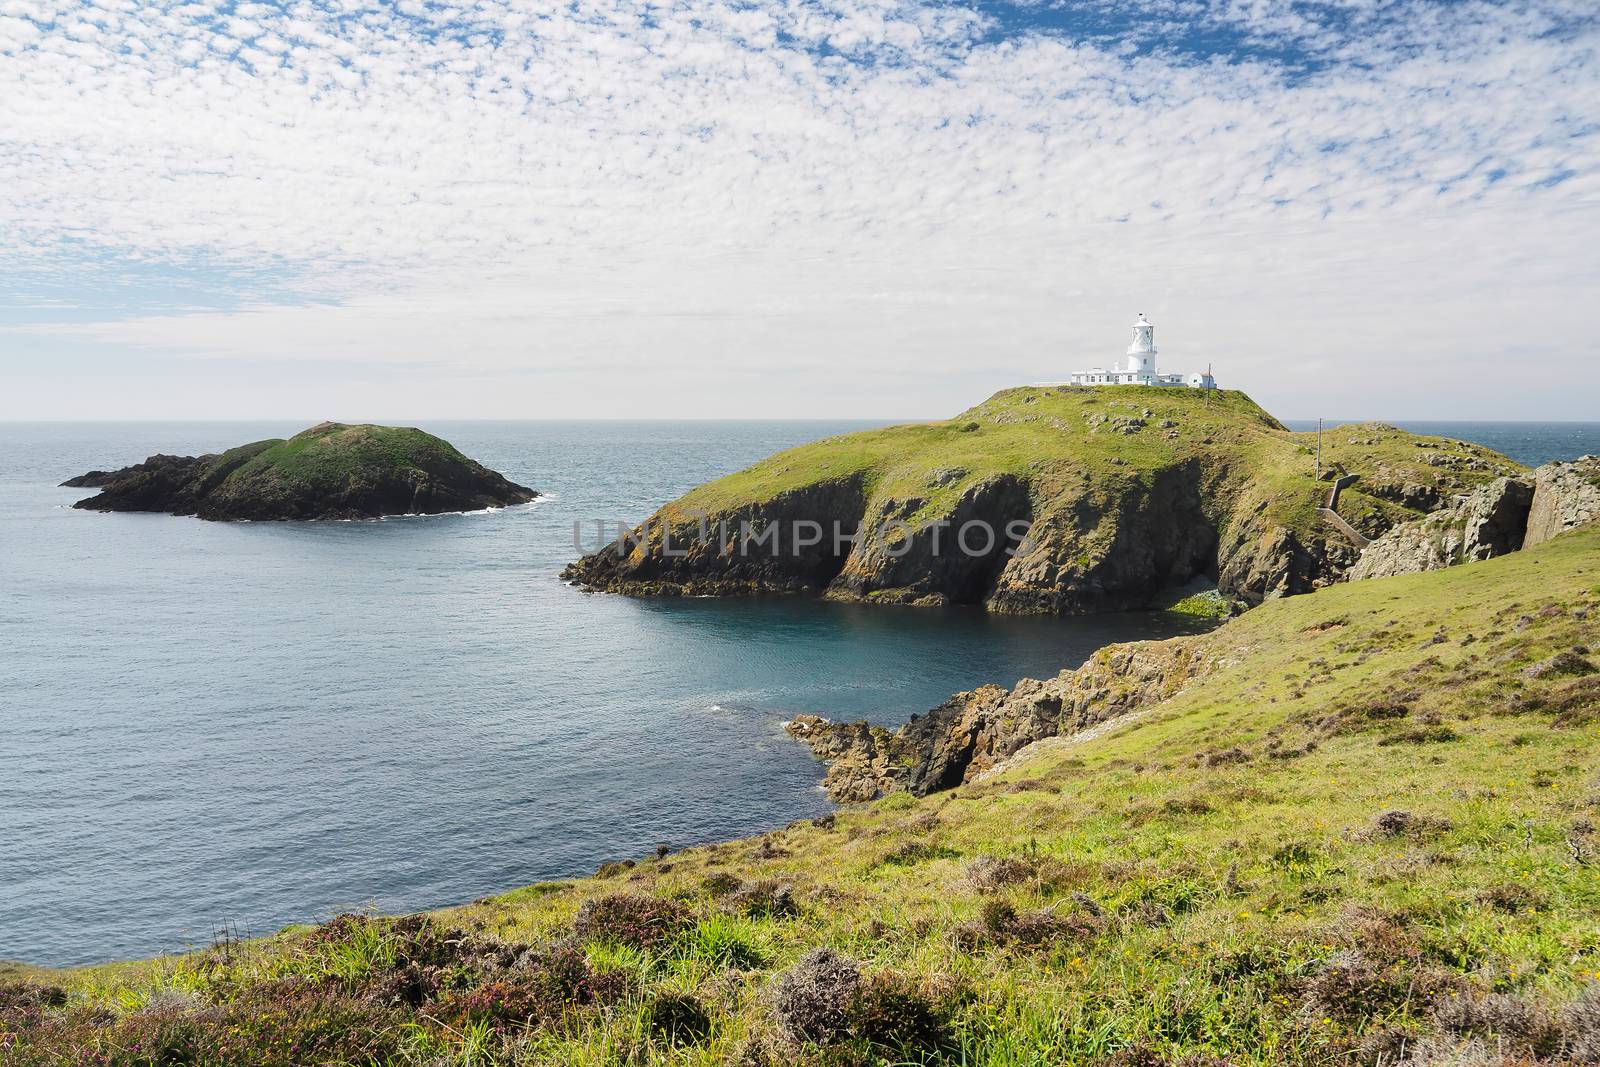 Strumble Head Lighthouse built by Trinity House in 1908 sitting on the top of the island of Ynys Meicel on a sunny day with white clouds overhead, Pembrokeshire Coast National Park, Wales, UK